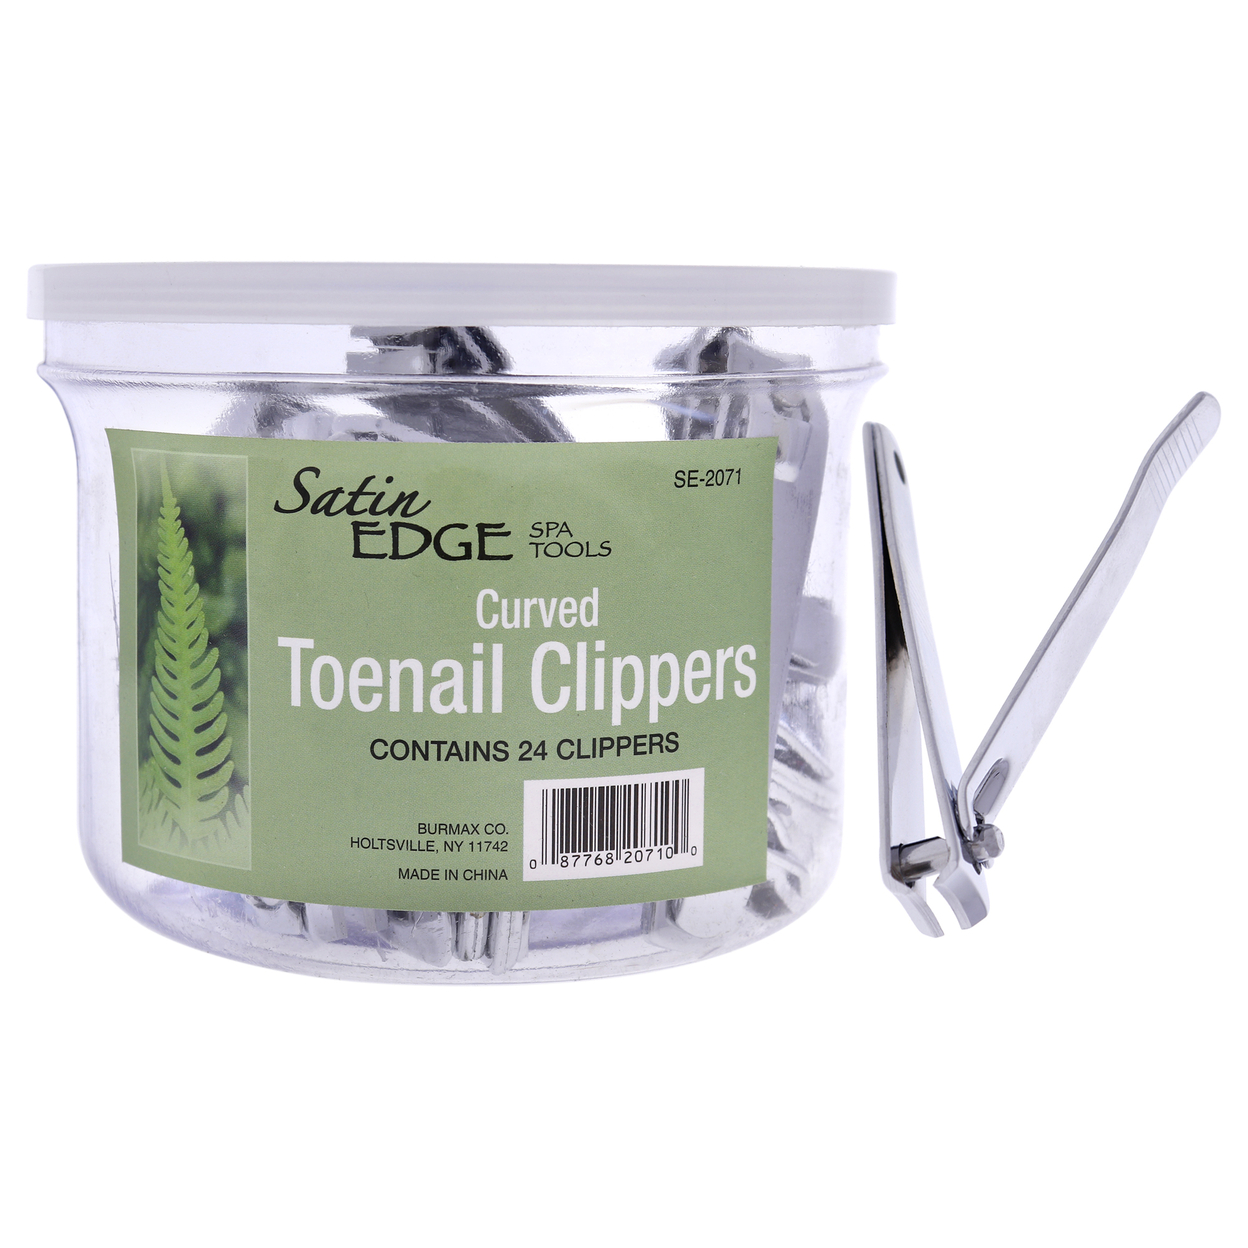 Satin Edge Curved Toenail Clippers 24 Pc